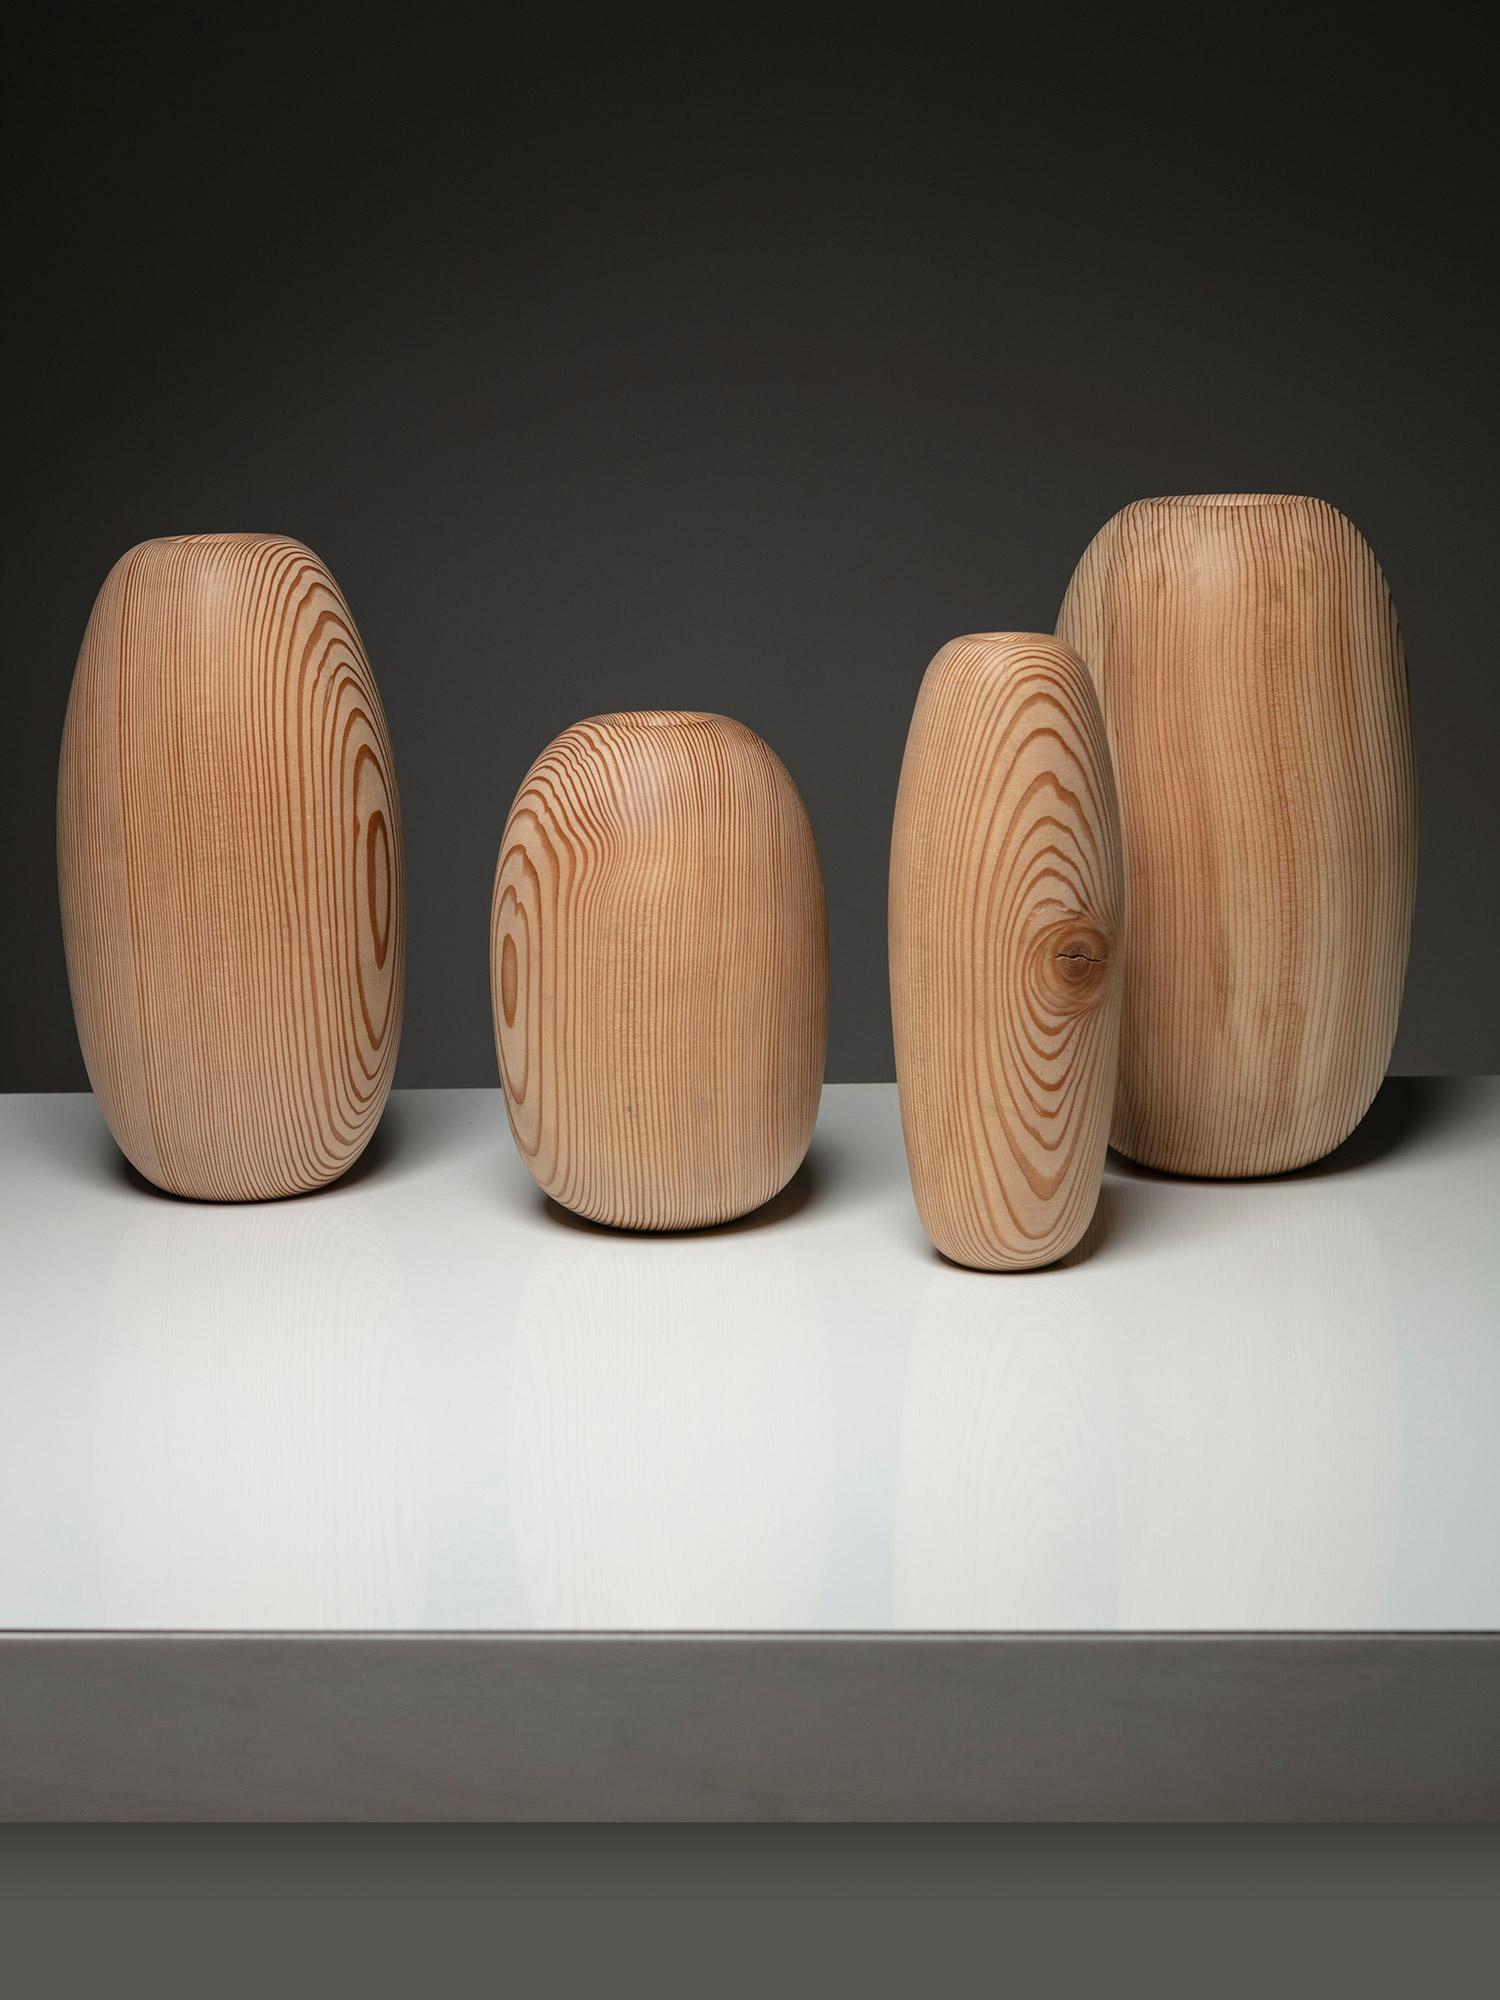 Italian Set of Four Organic Shaped Solid Larch Wood Vases, Italy, 1980s For Sale